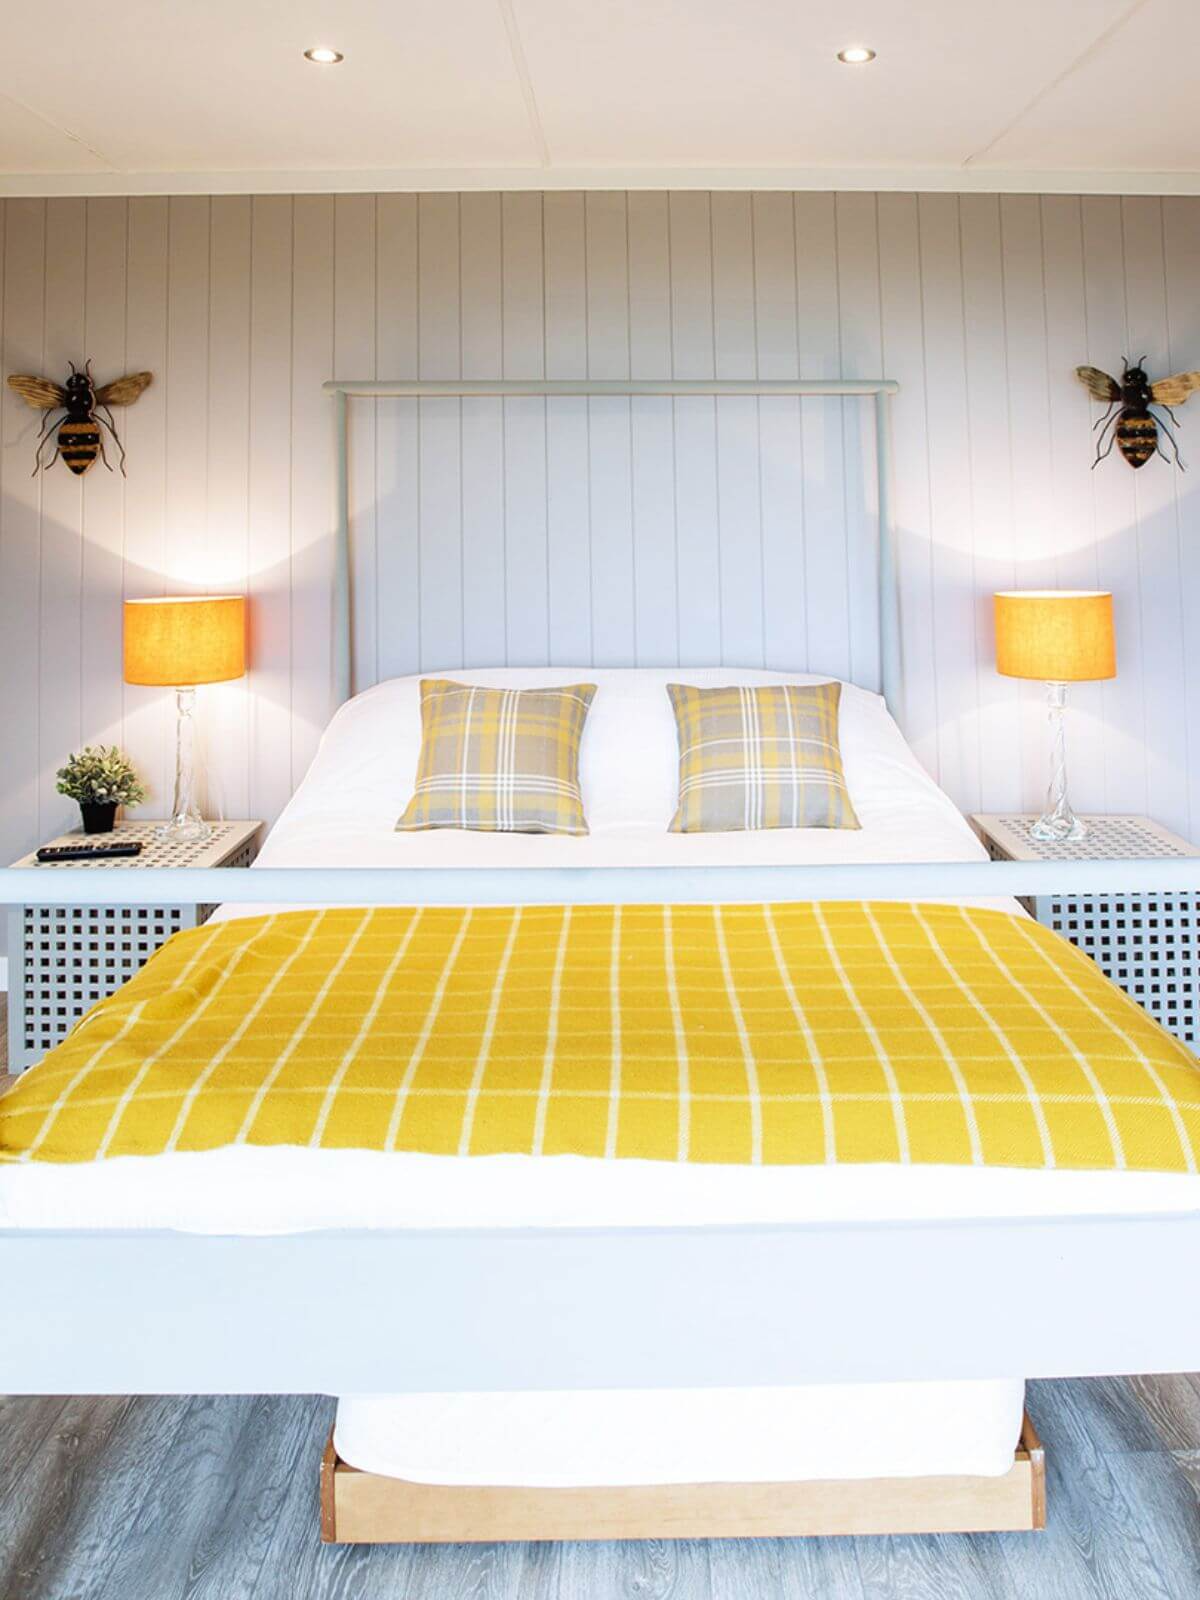 inside view of glamping lodge with double bed and spotlights and yellow checked blanket and checked cushions and bumble bee wall hangings and grey flooring and yellow lamp shades